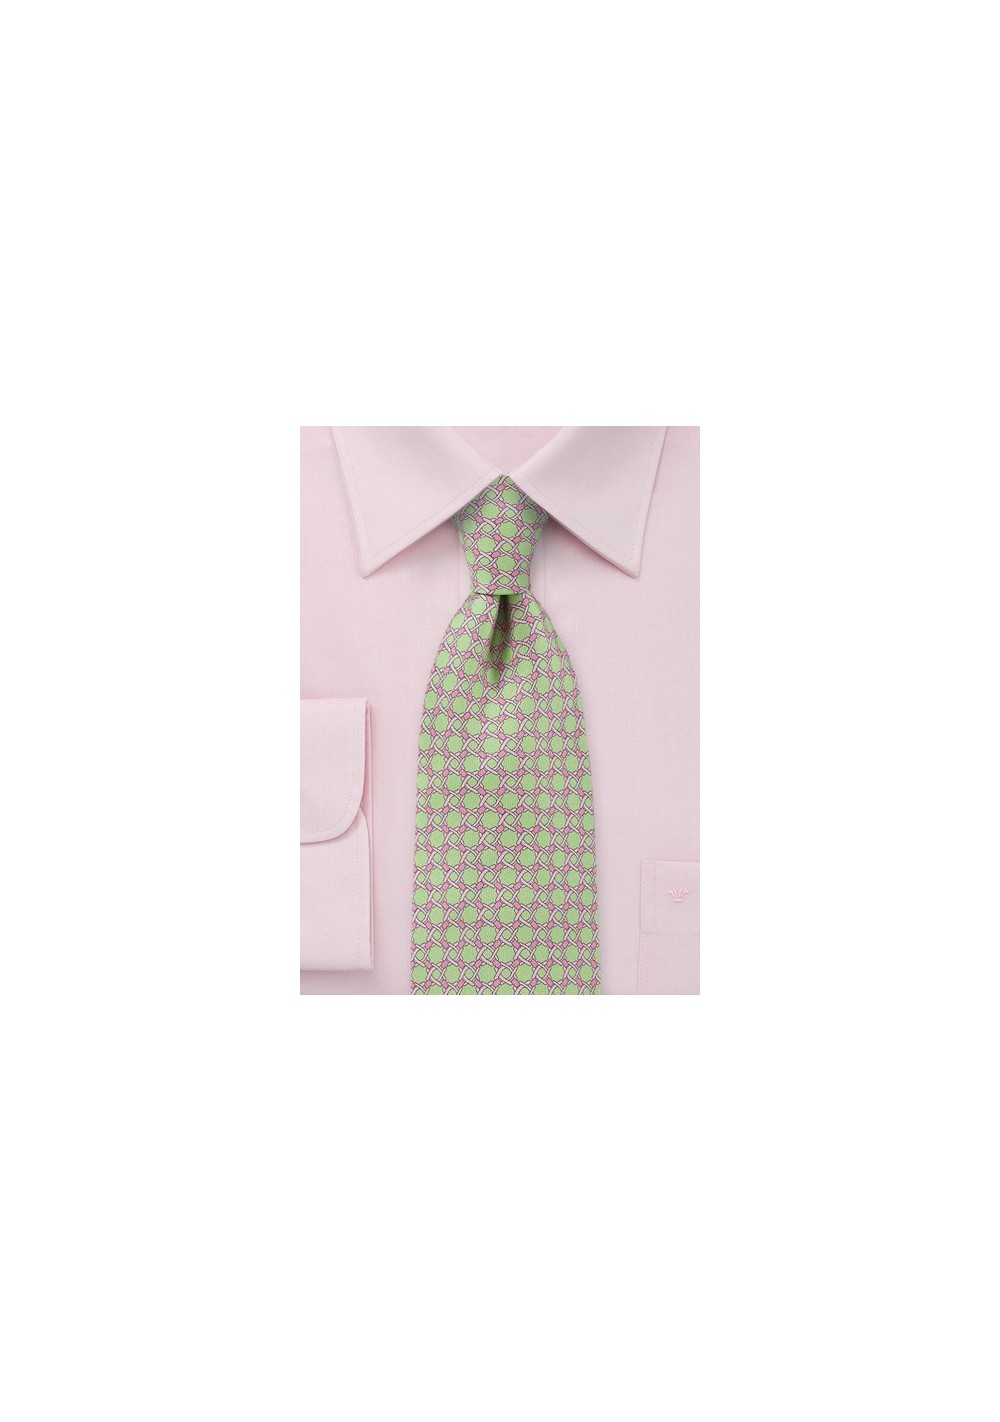 Graphic Patterned Tie in Lime Green and Pink